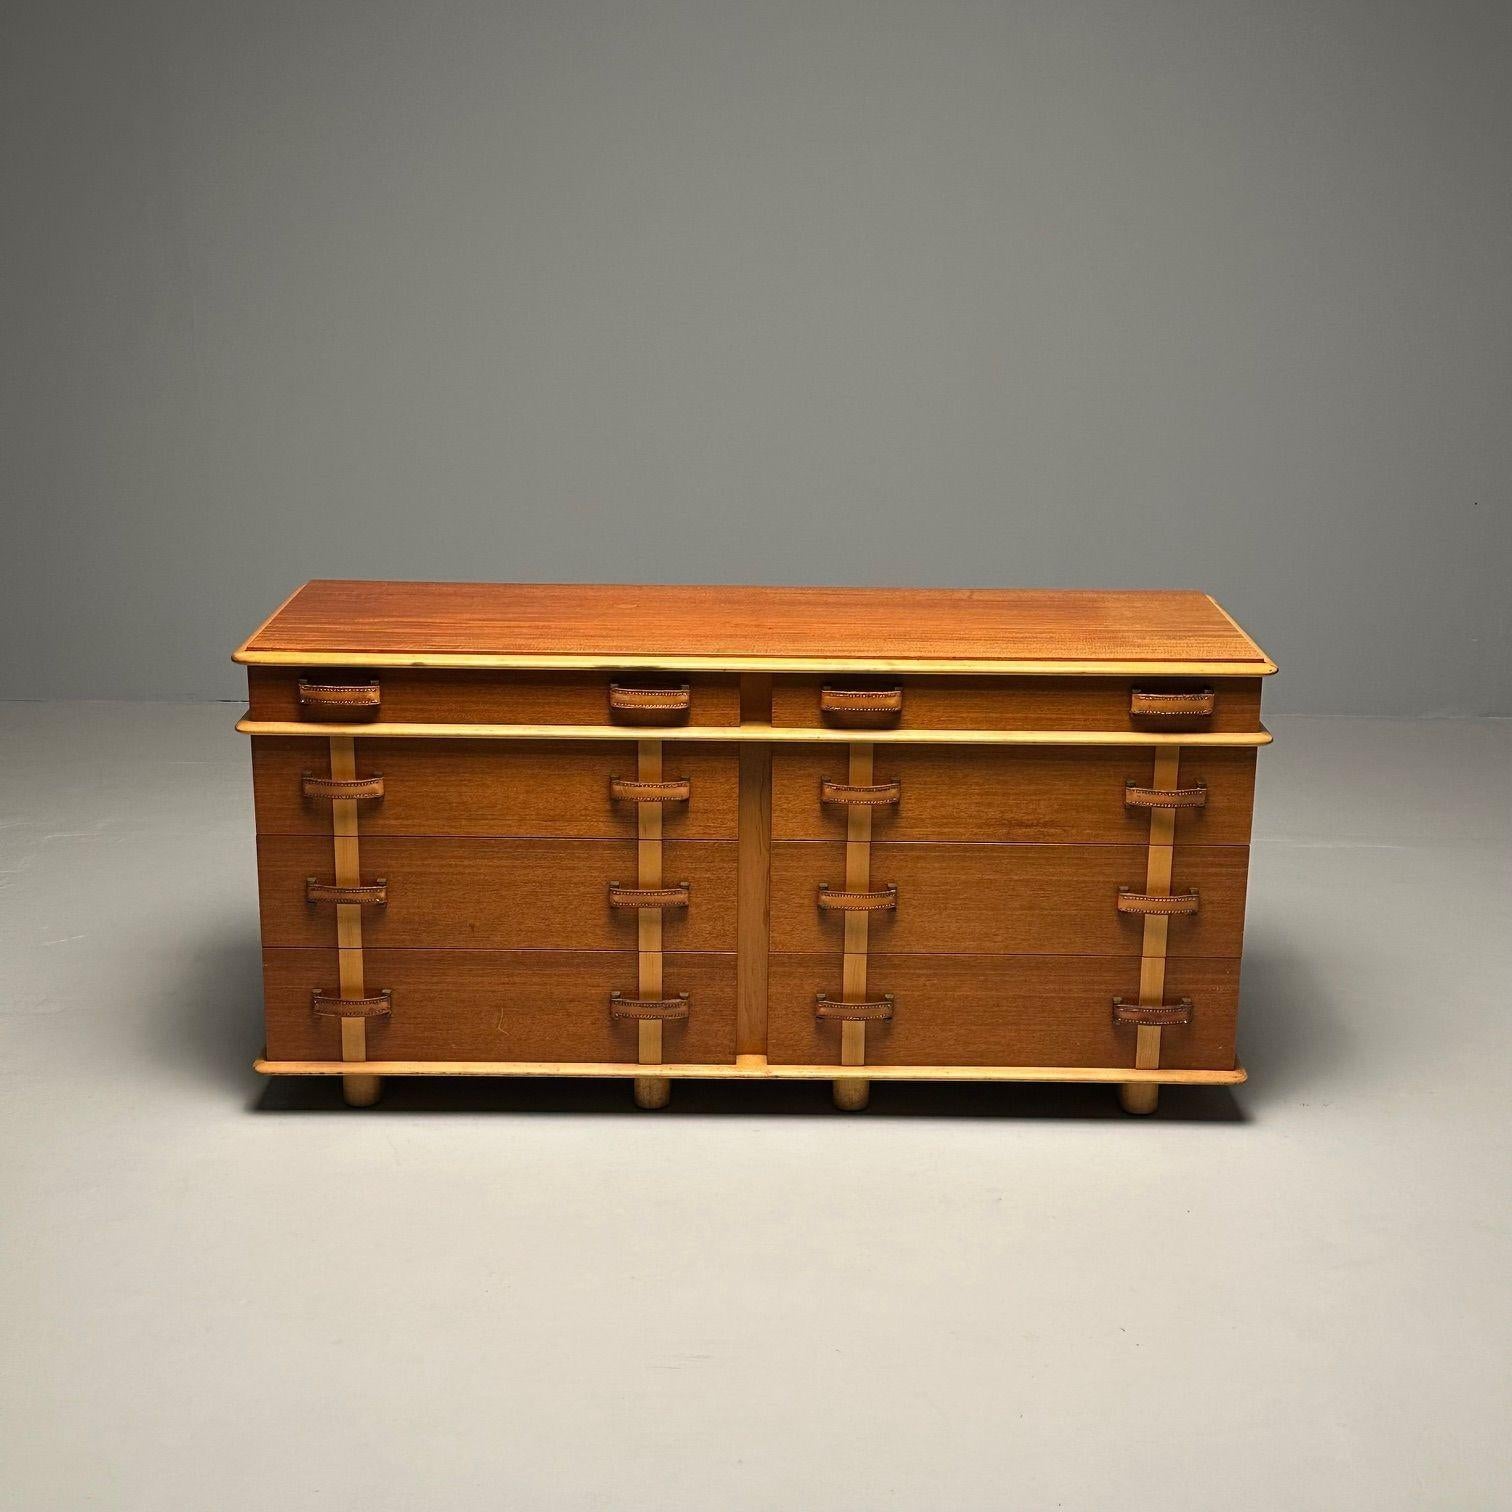 Mid-Century Modern Paul Frankl / John Stuart Dresser, Sideboard, Bedroom Set

Collectors opportunity to own a rare Paul Frankl designed dresser for Johnson Furniture Co. and retailed by John Stuart. Branded Johnson Furniture Co. and labeled John